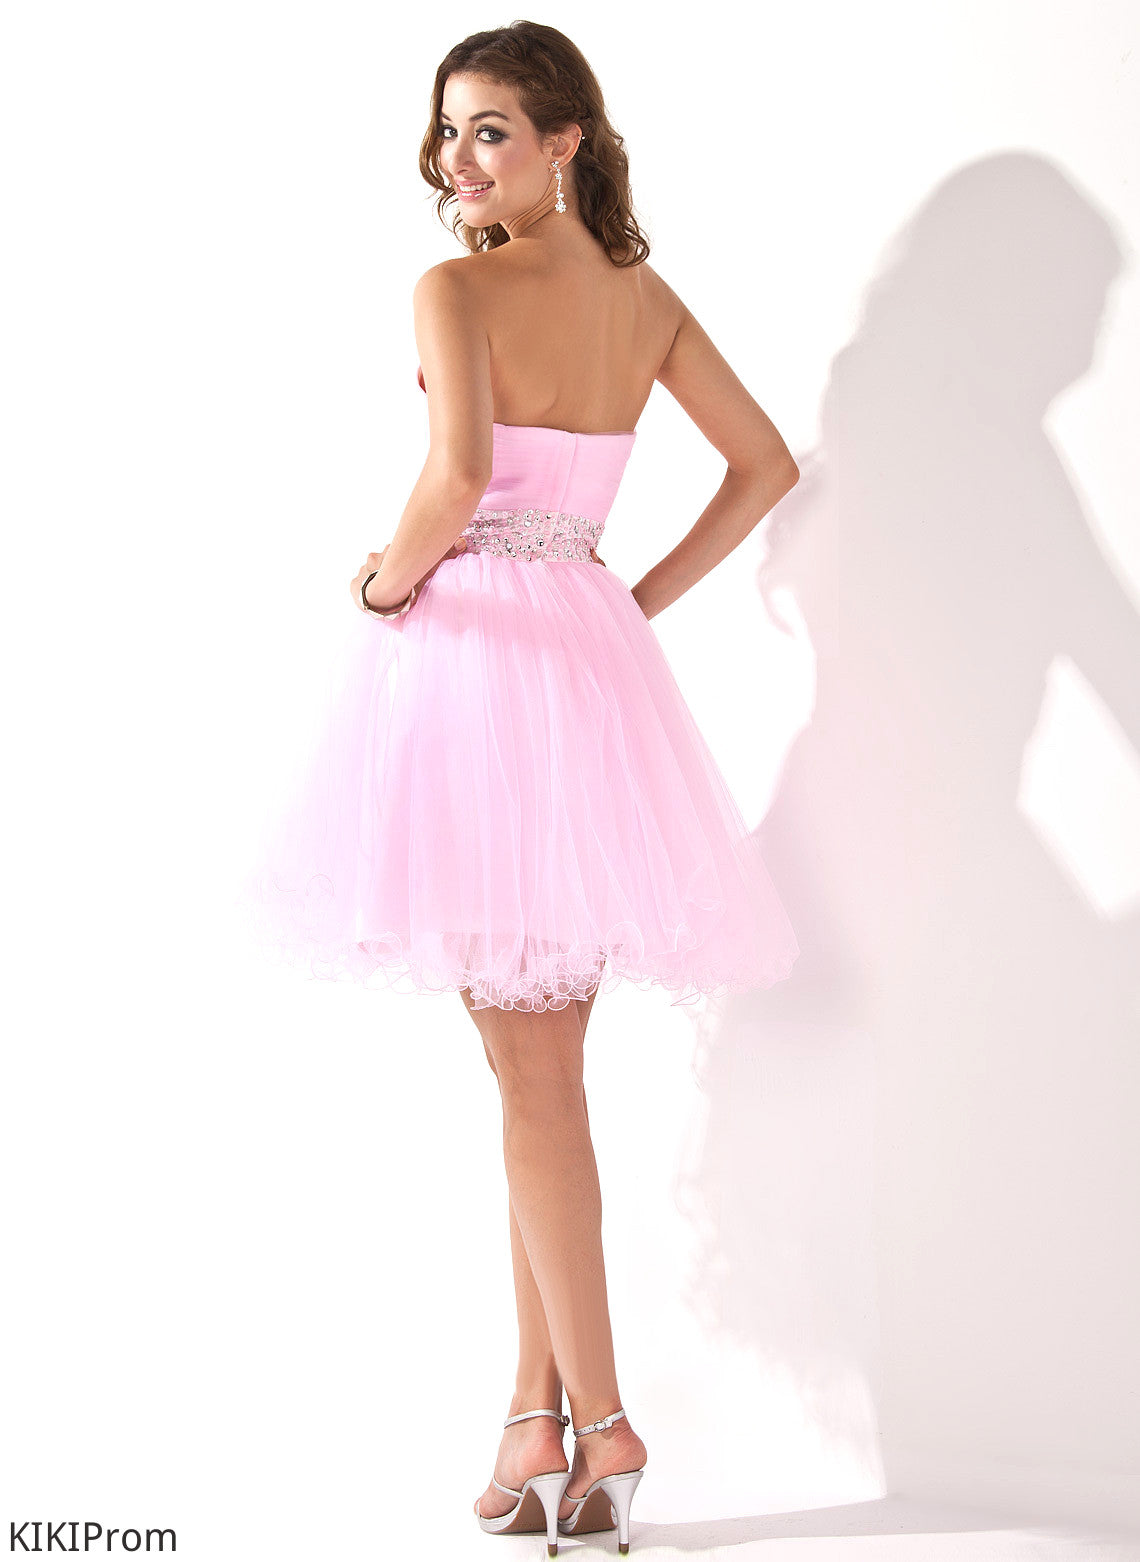 A-Line Dress Beading Sequins Jean Homecoming With Tulle Short/Mini Sweetheart Homecoming Dresses